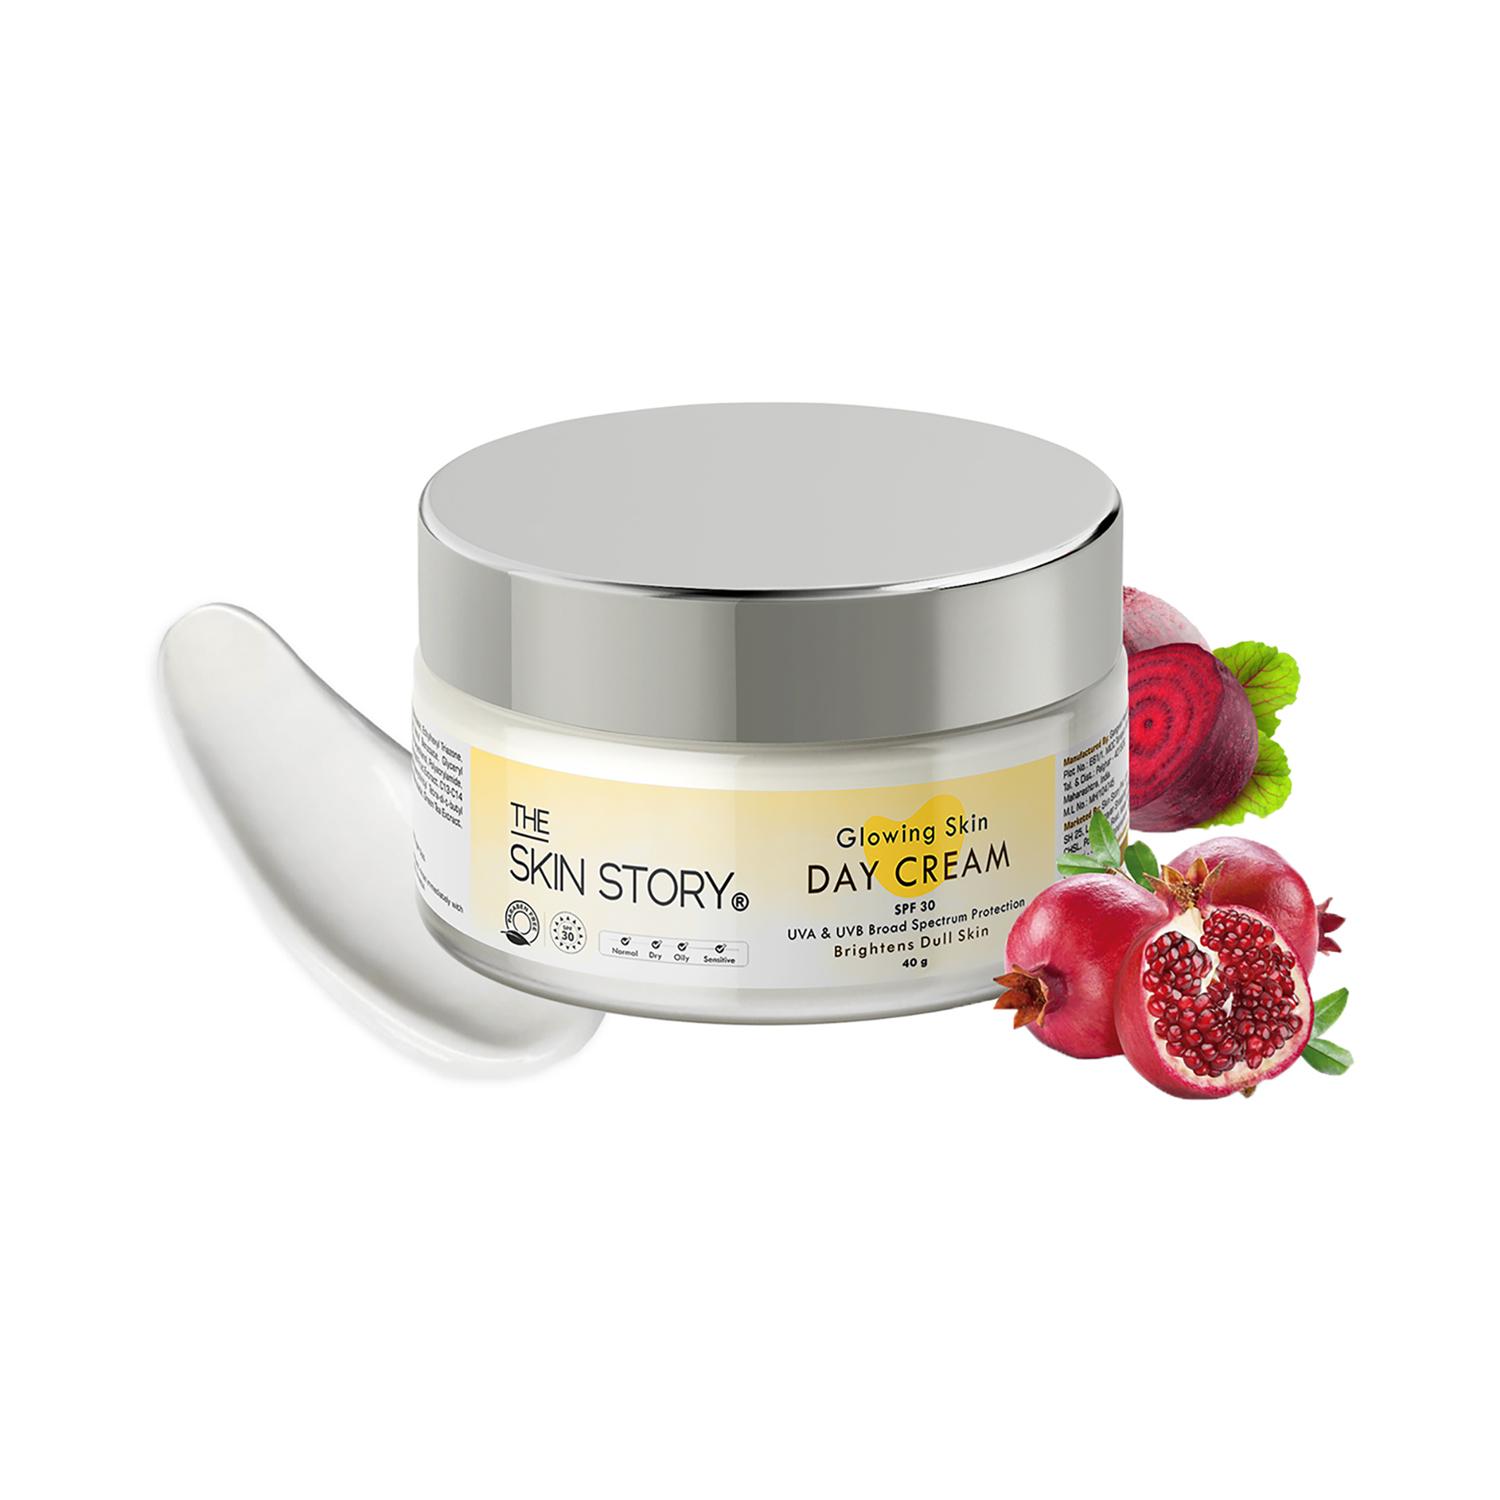 The Skin Story | The Skin Story Glowing Skin Day Cream With SPF 30 (40 g)